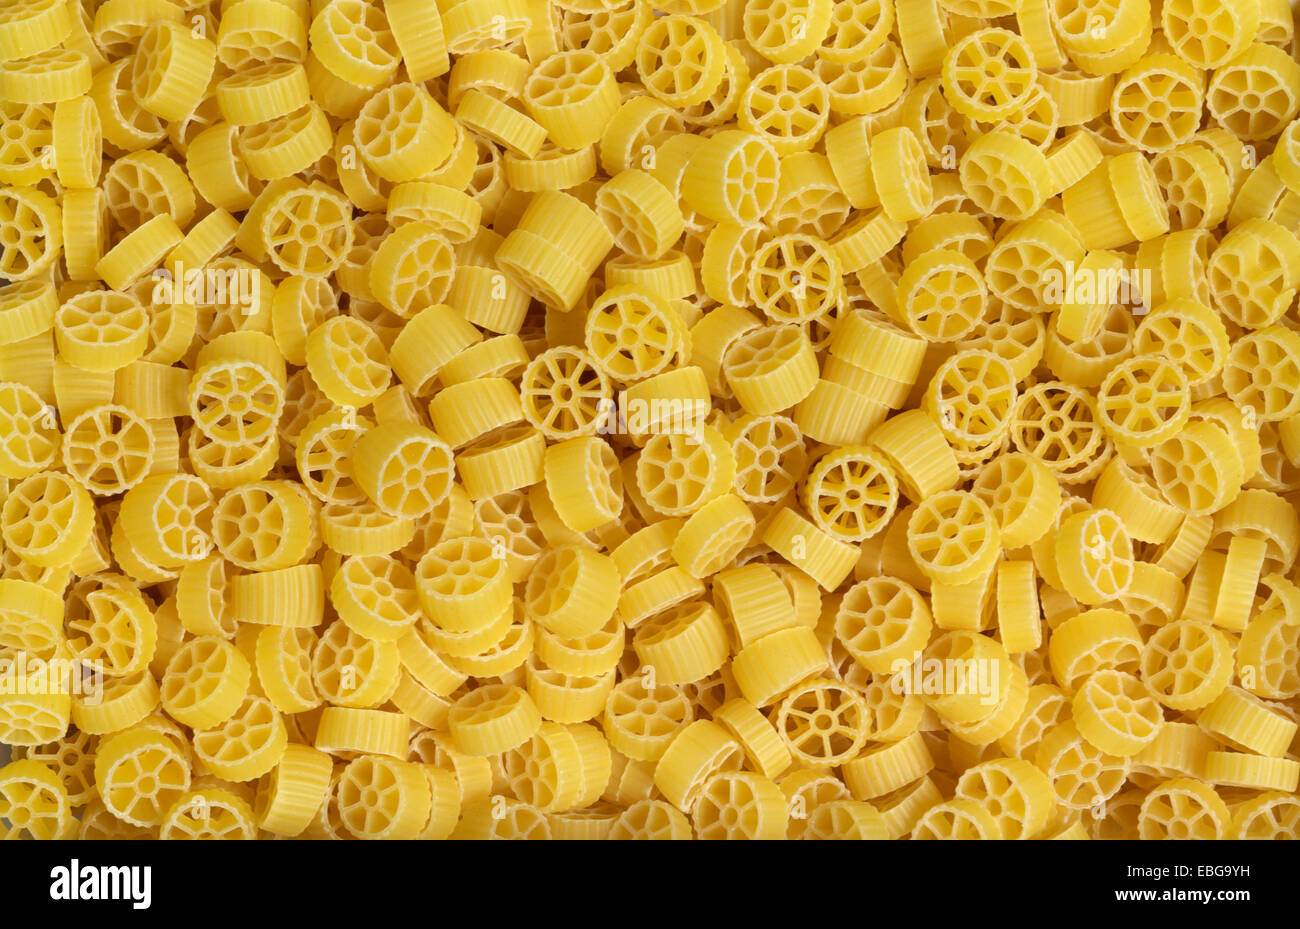 full frame italian pasta background with lots of Ruote noodles Stock Photo